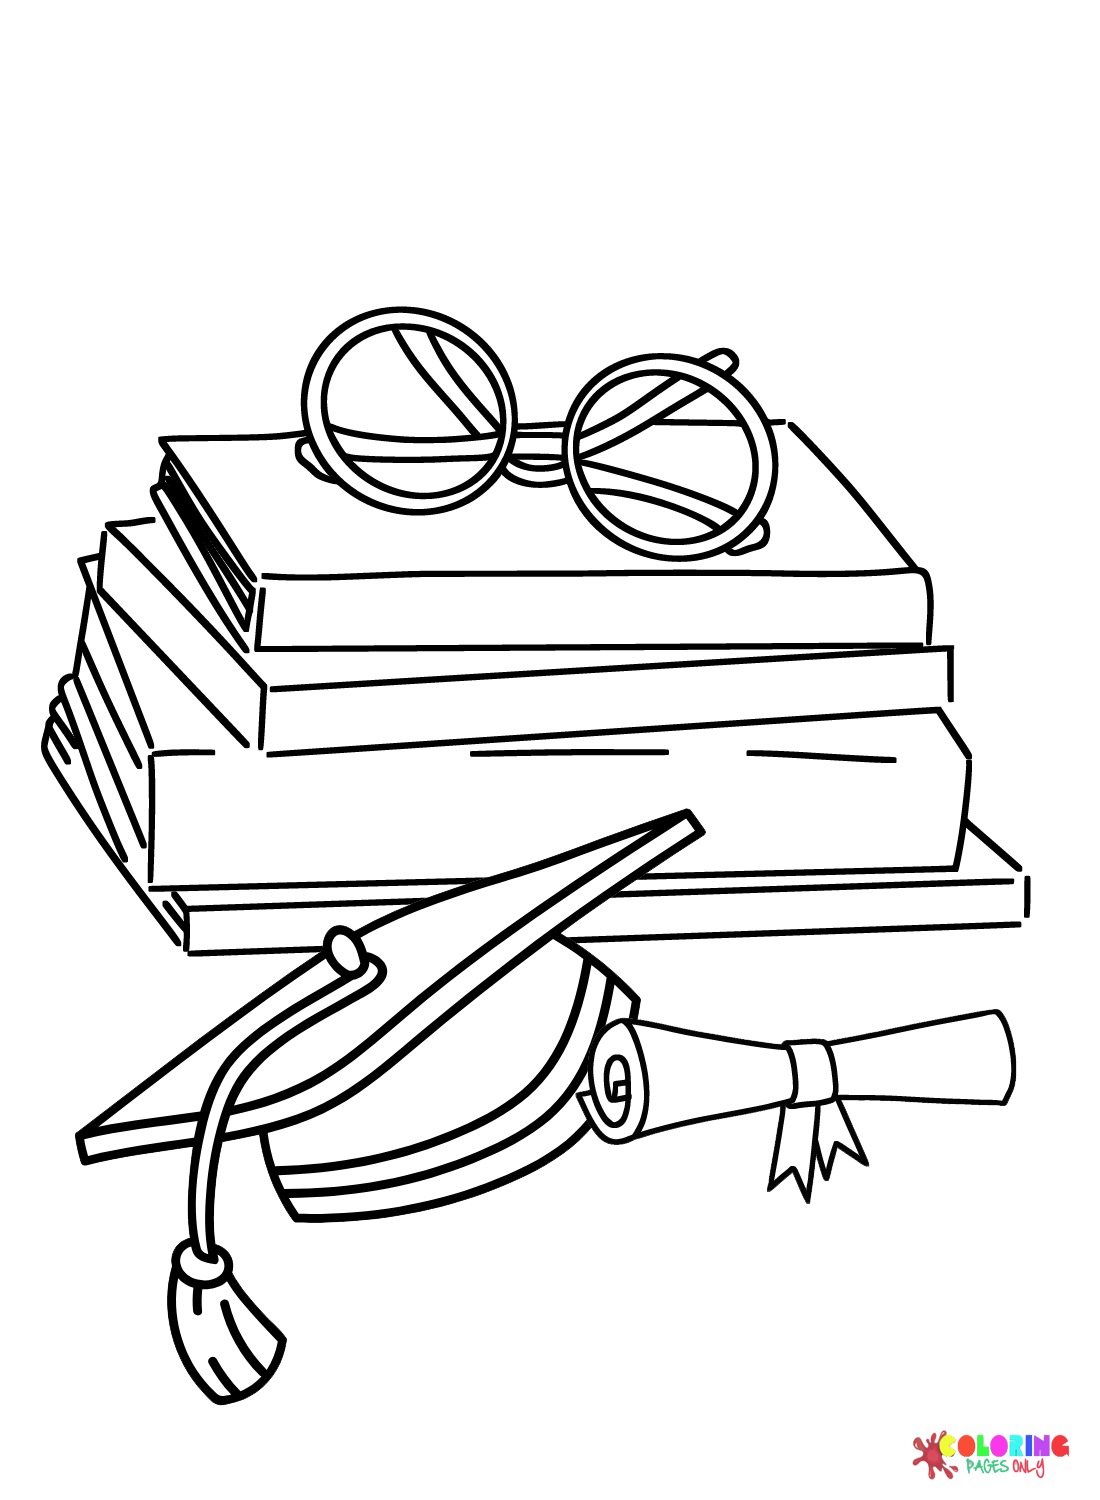 Intellectual color Sheets Coloring Page